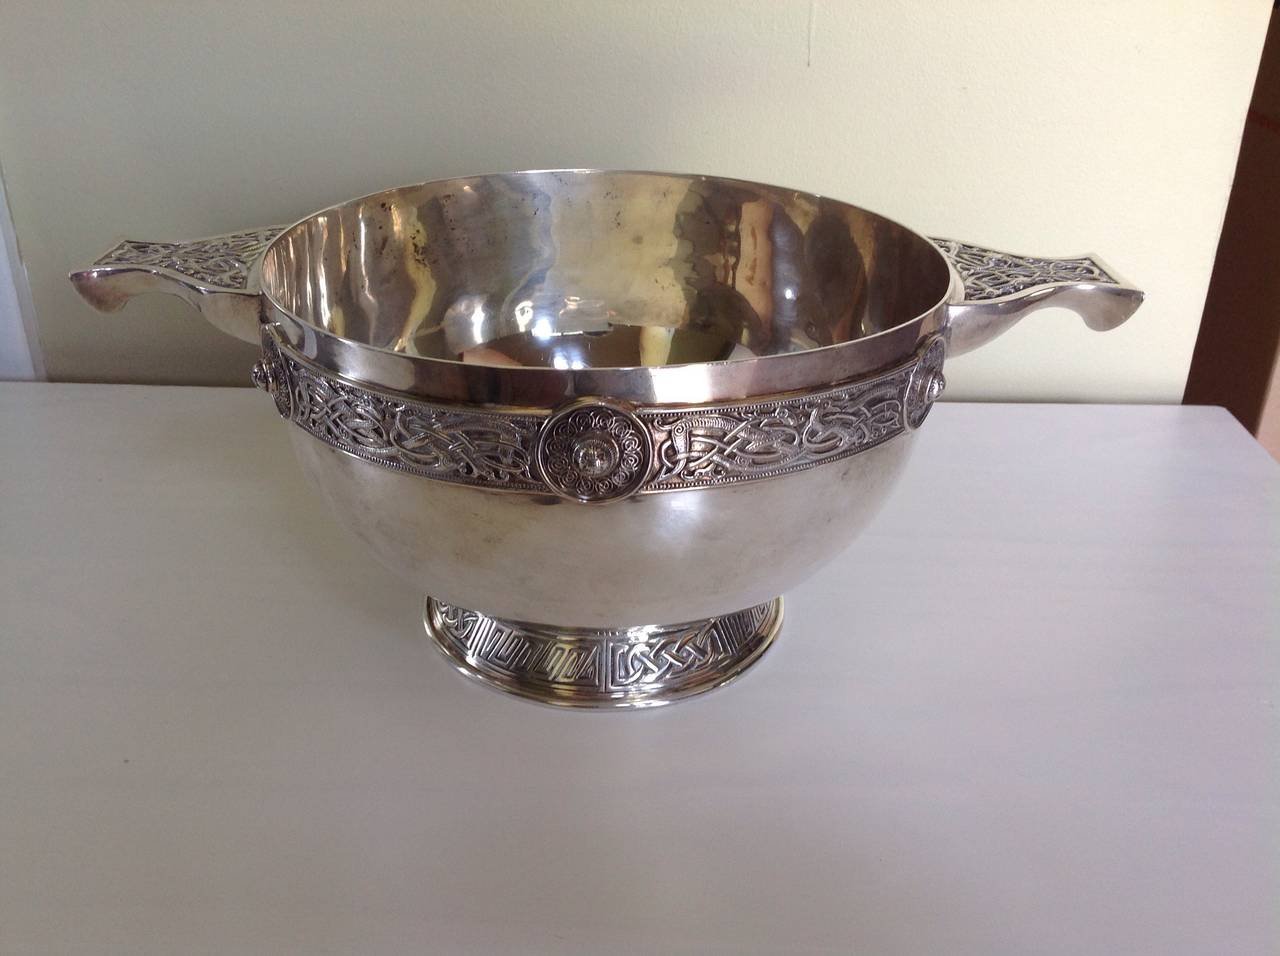 A large, unusual and very handsome English Sterling silver bowl of beautiful proportions decorated in the Celtic style, made in London in 1906 by James Wakeley and Frank Clarke Wheeler, which later became 